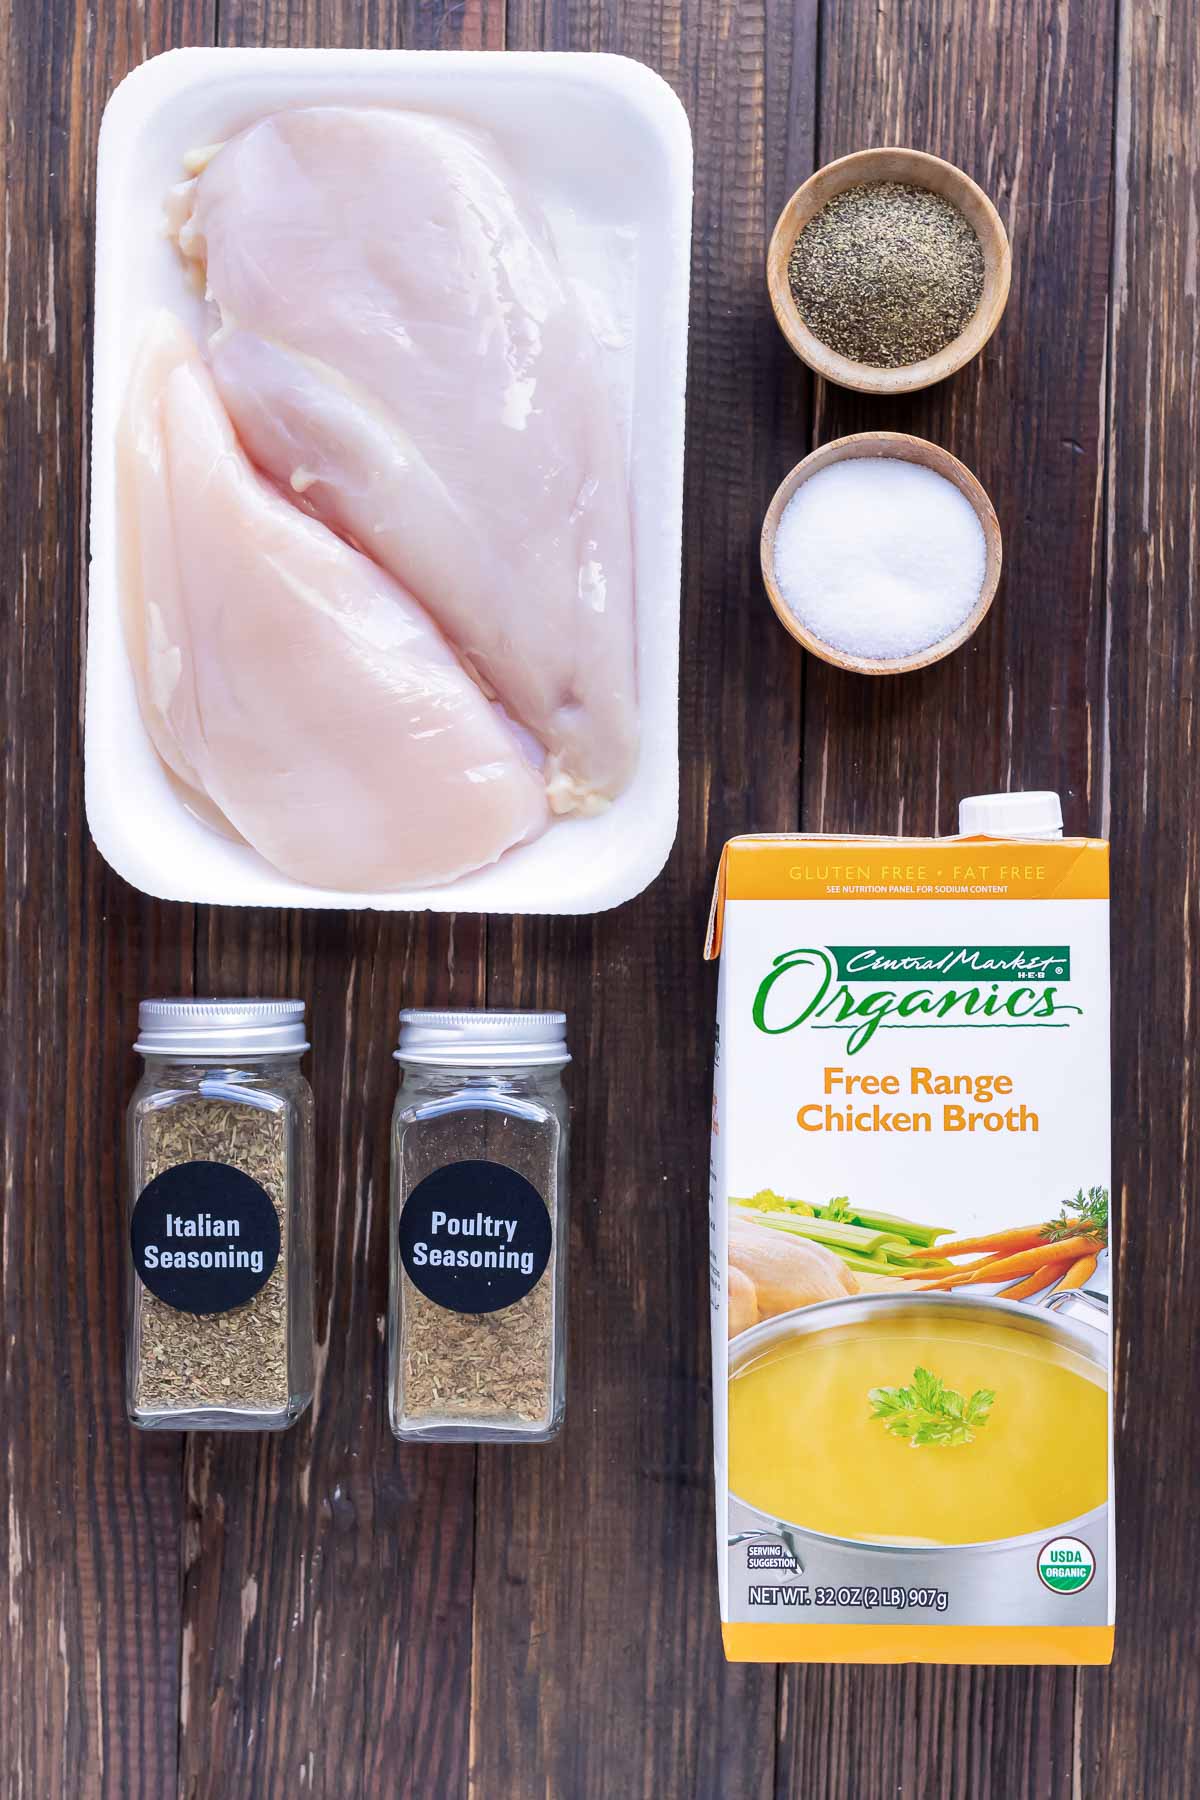 Chicken, salt, pepper, broth, and seasoning mixes as the ingredients for an easy shredded chicken recipe.